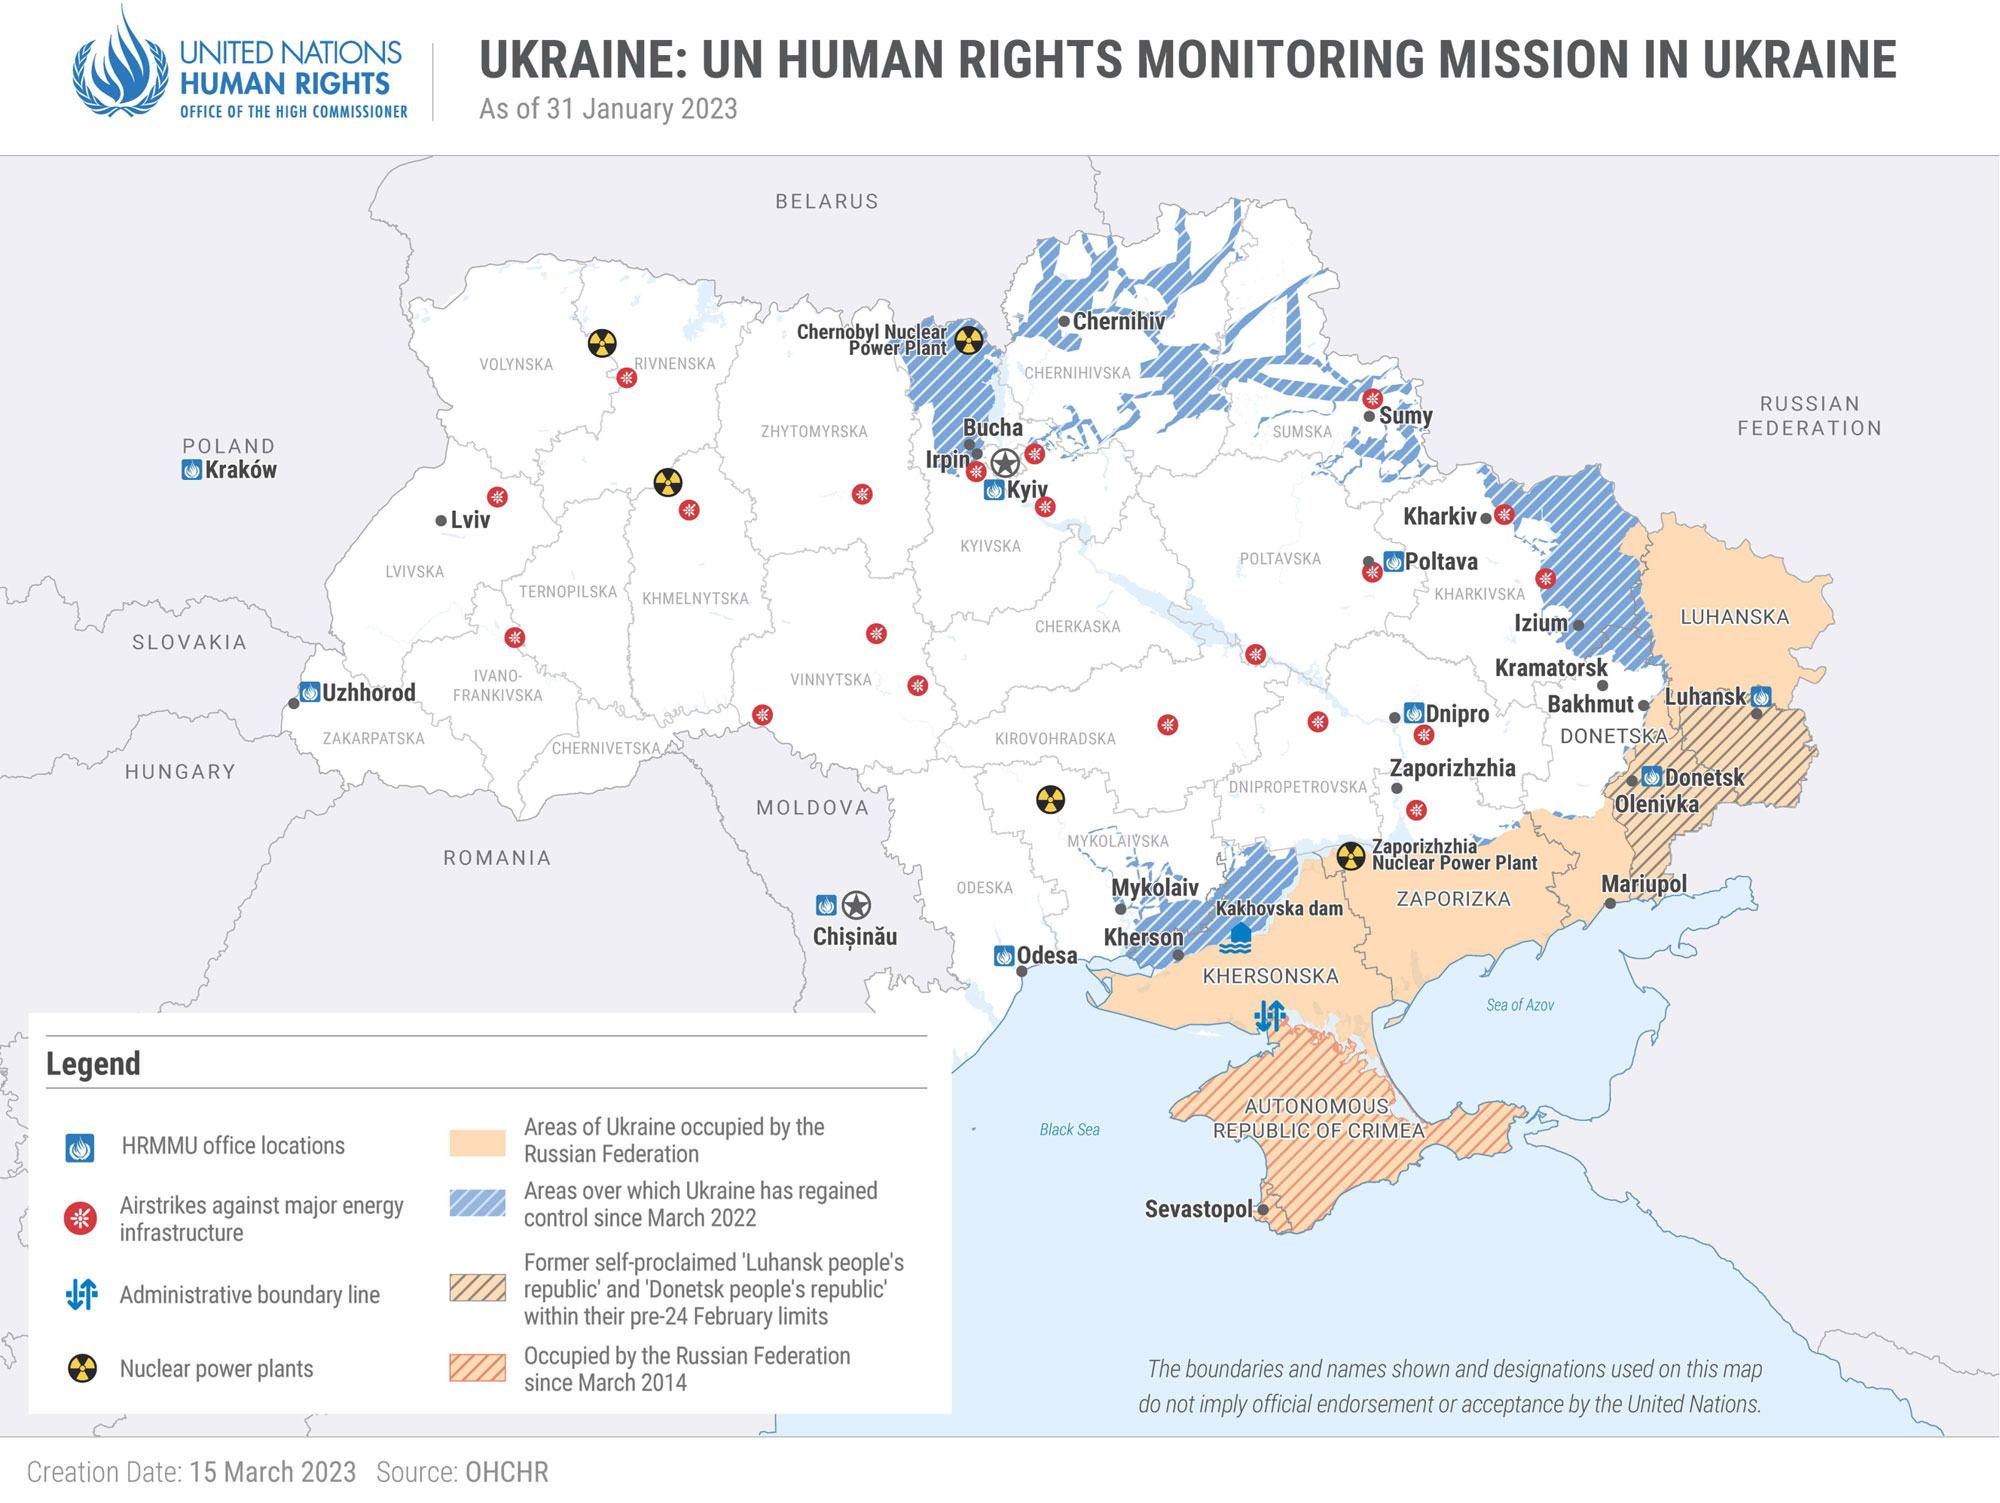 35th Report on the Human Rights Situation in Ukraine